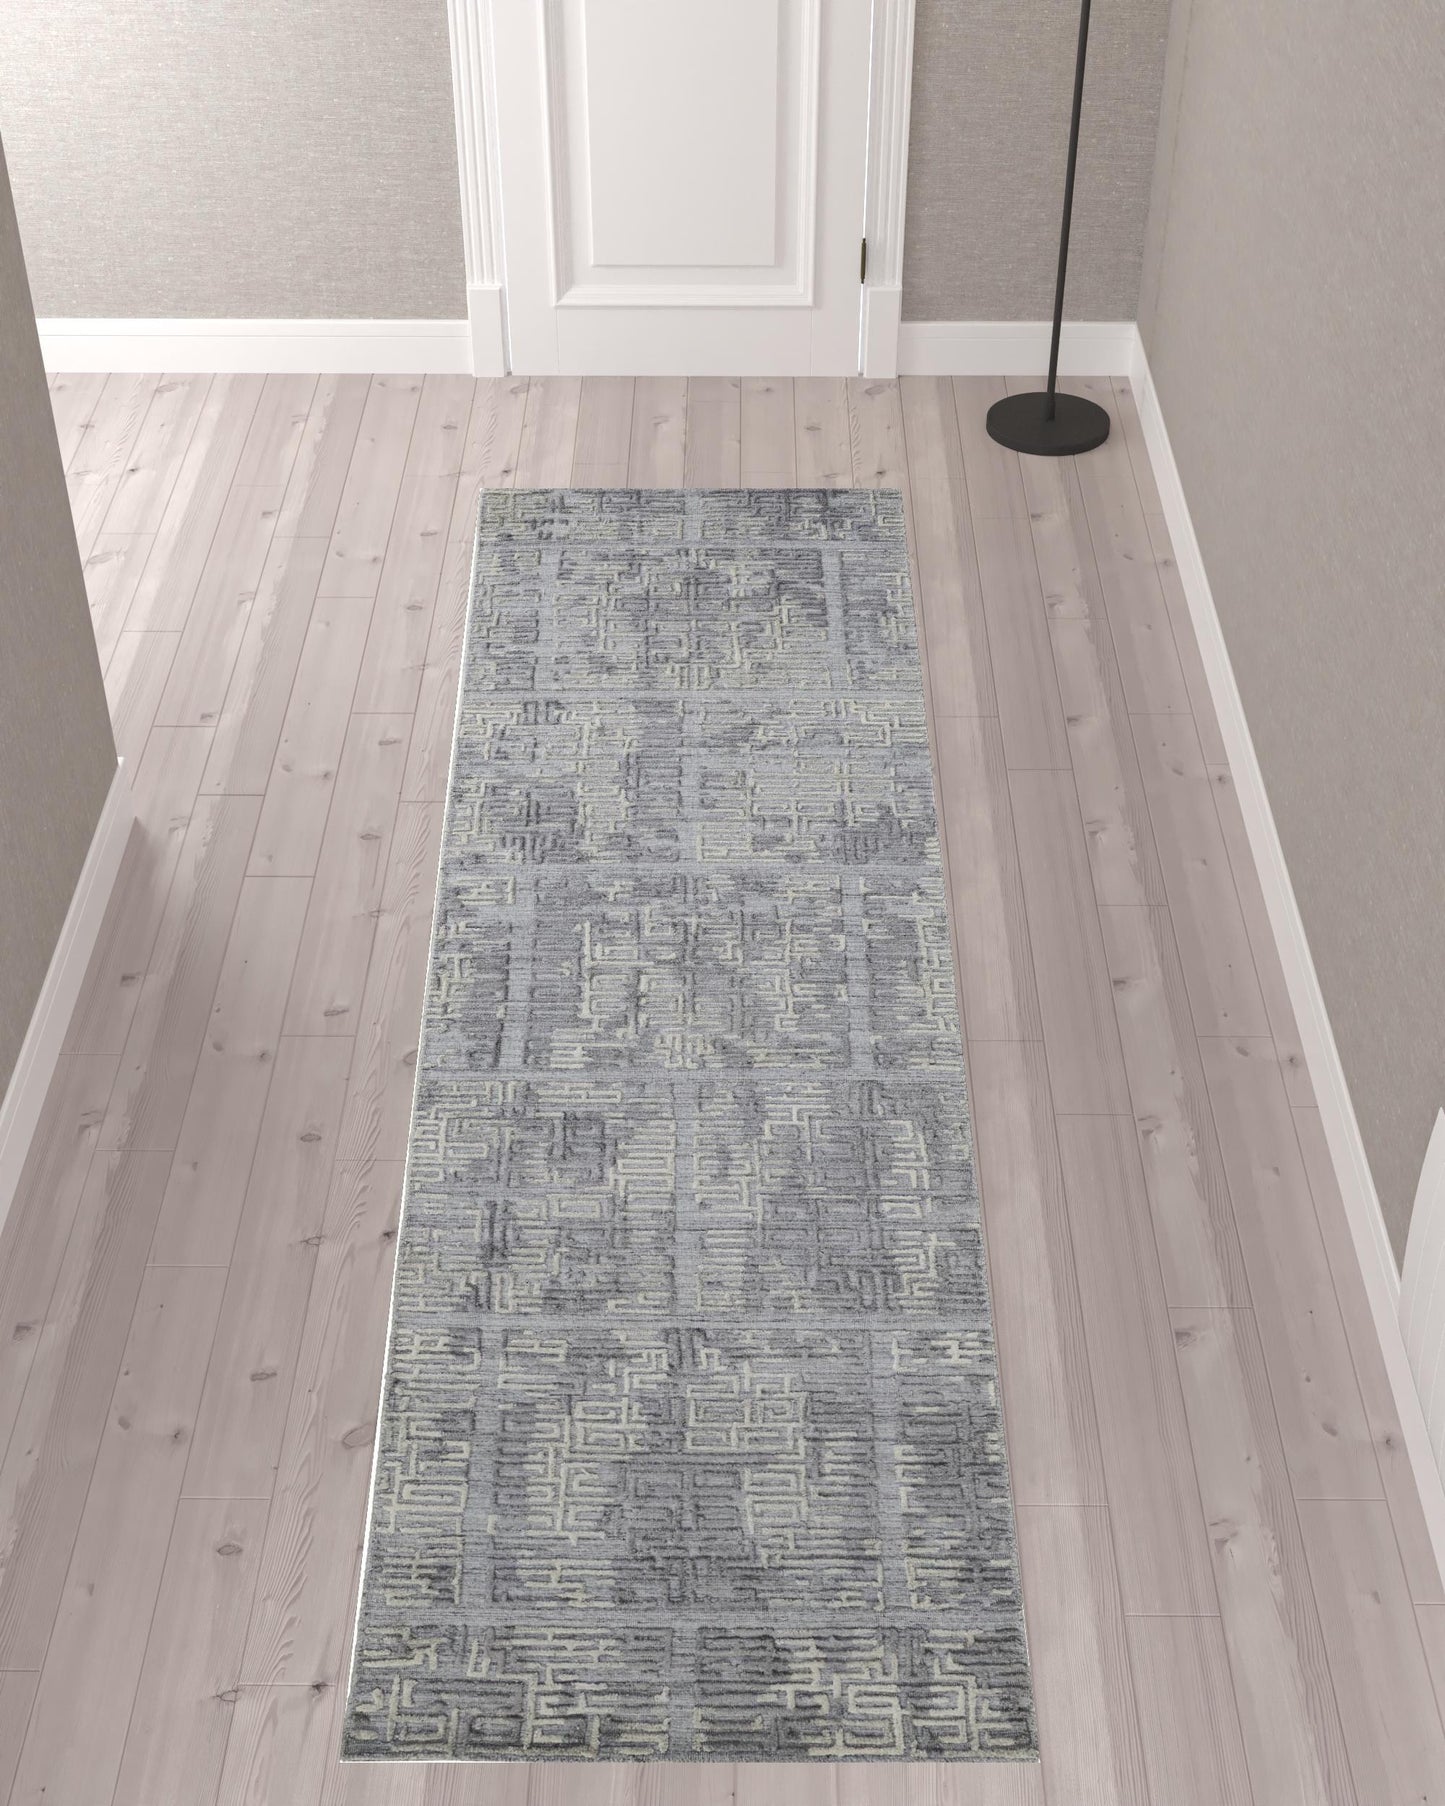 2' X 3' Gray And Ivory Abstract Hand Woven Area Rug